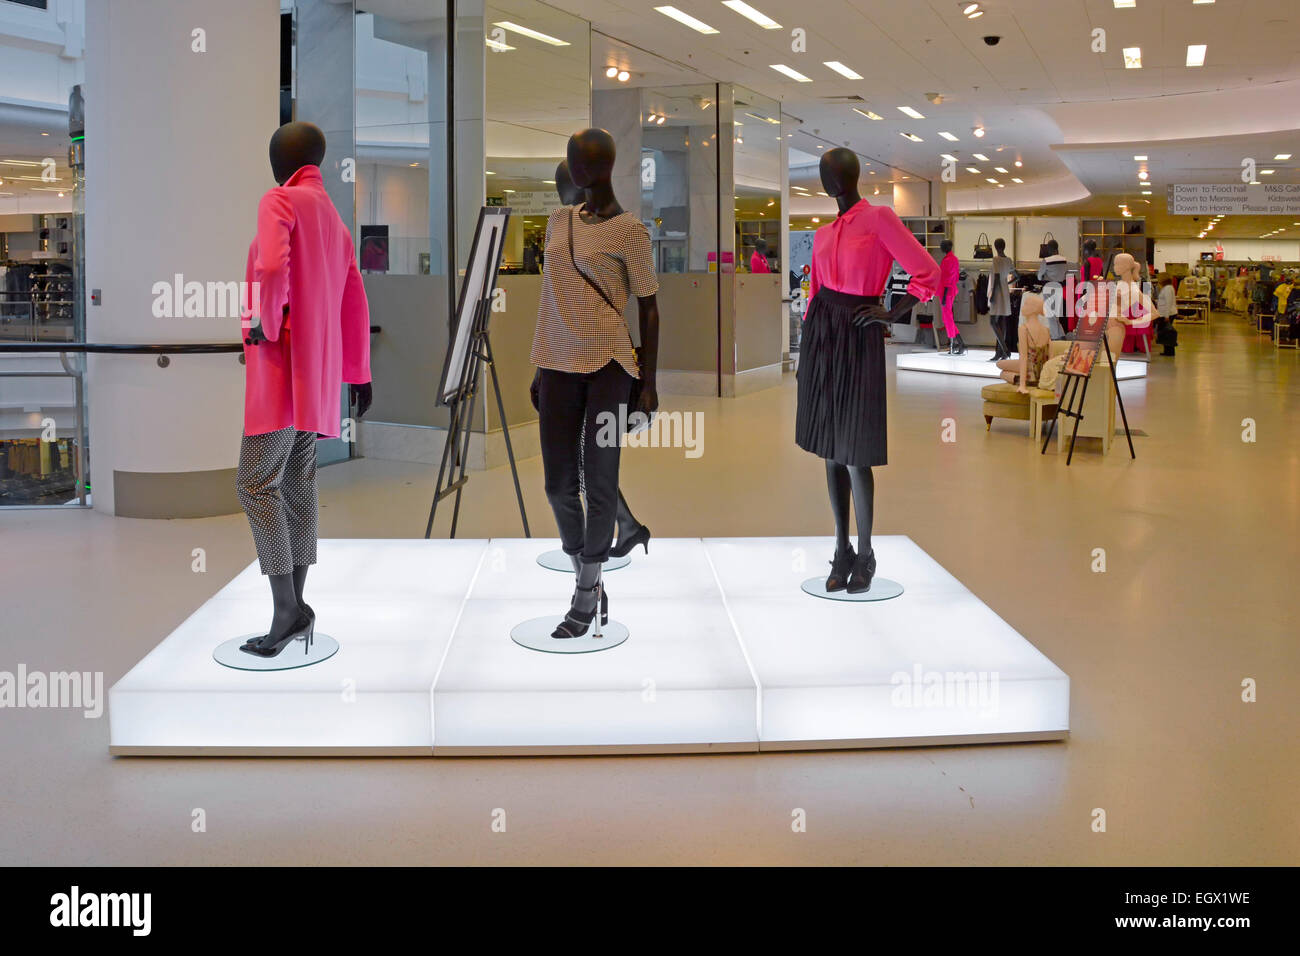 Interior of Marks and Spencer store with illuminated pedestal displaying ladies fashions on mannequins Essex England UK Stock Photo